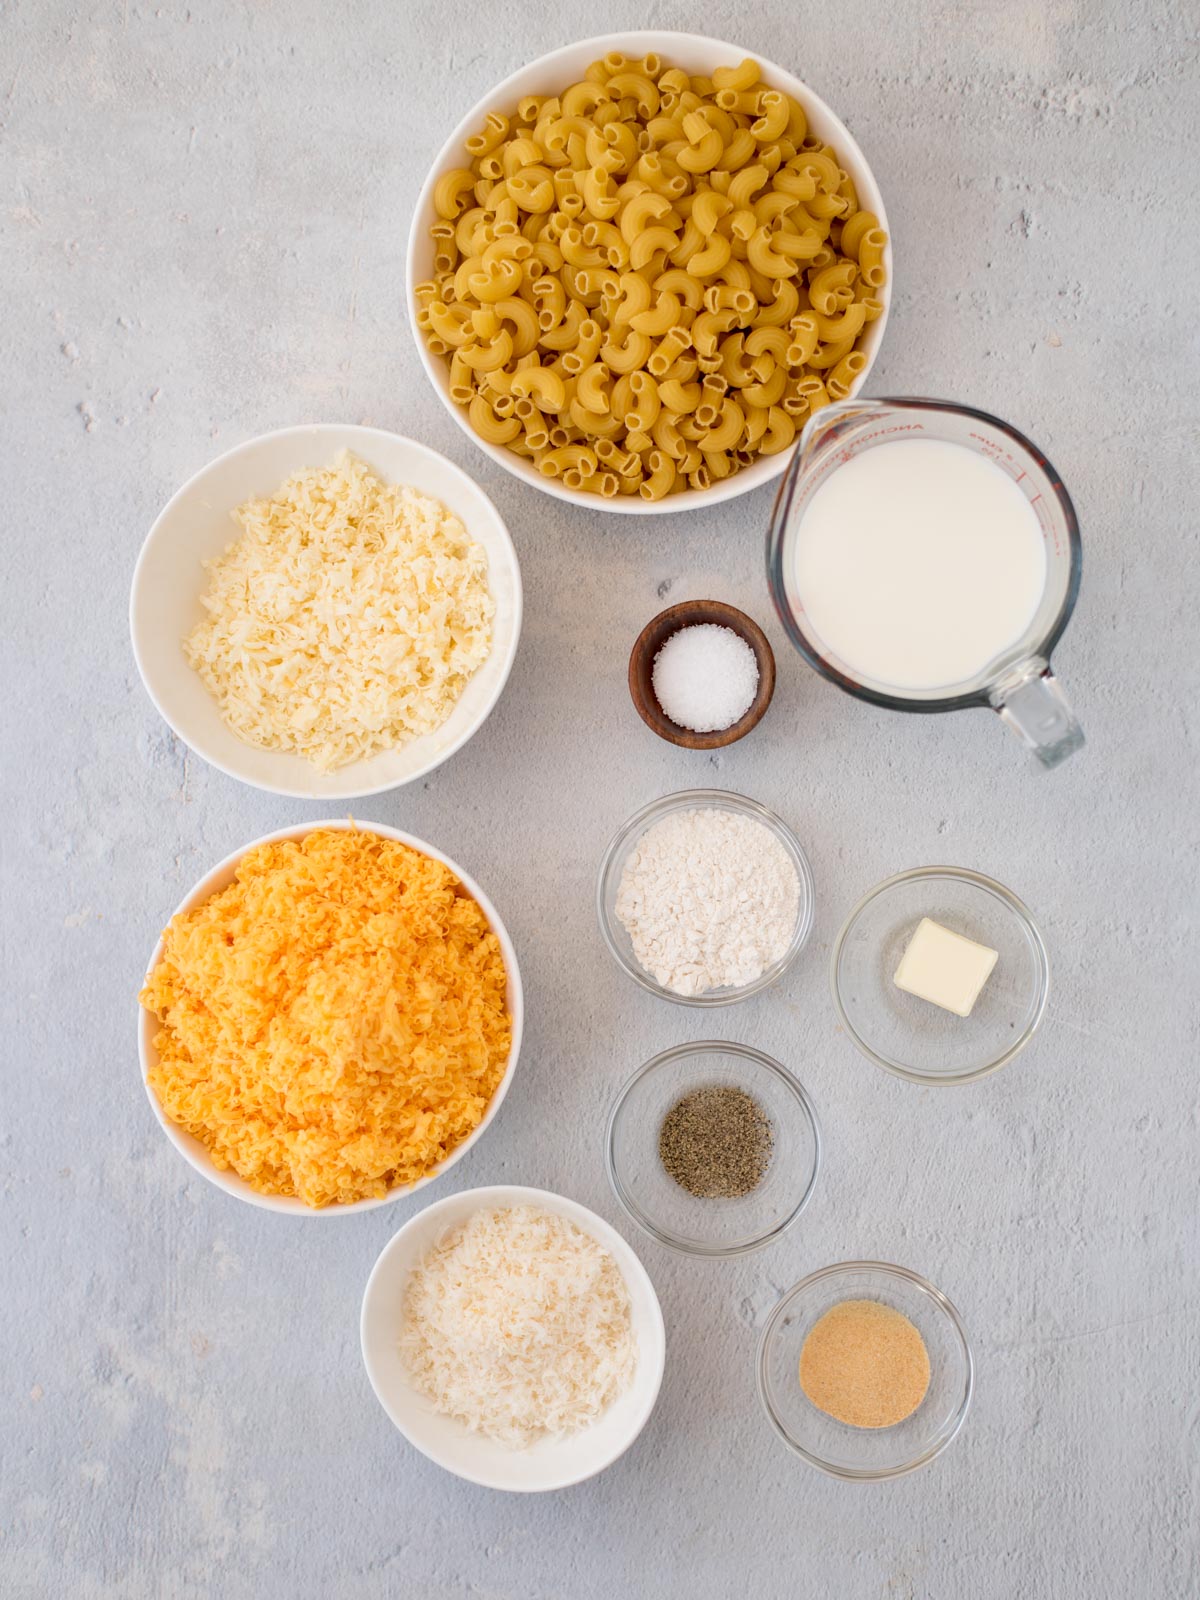 Ingredients shown are used to prepare baked mac and cheese.